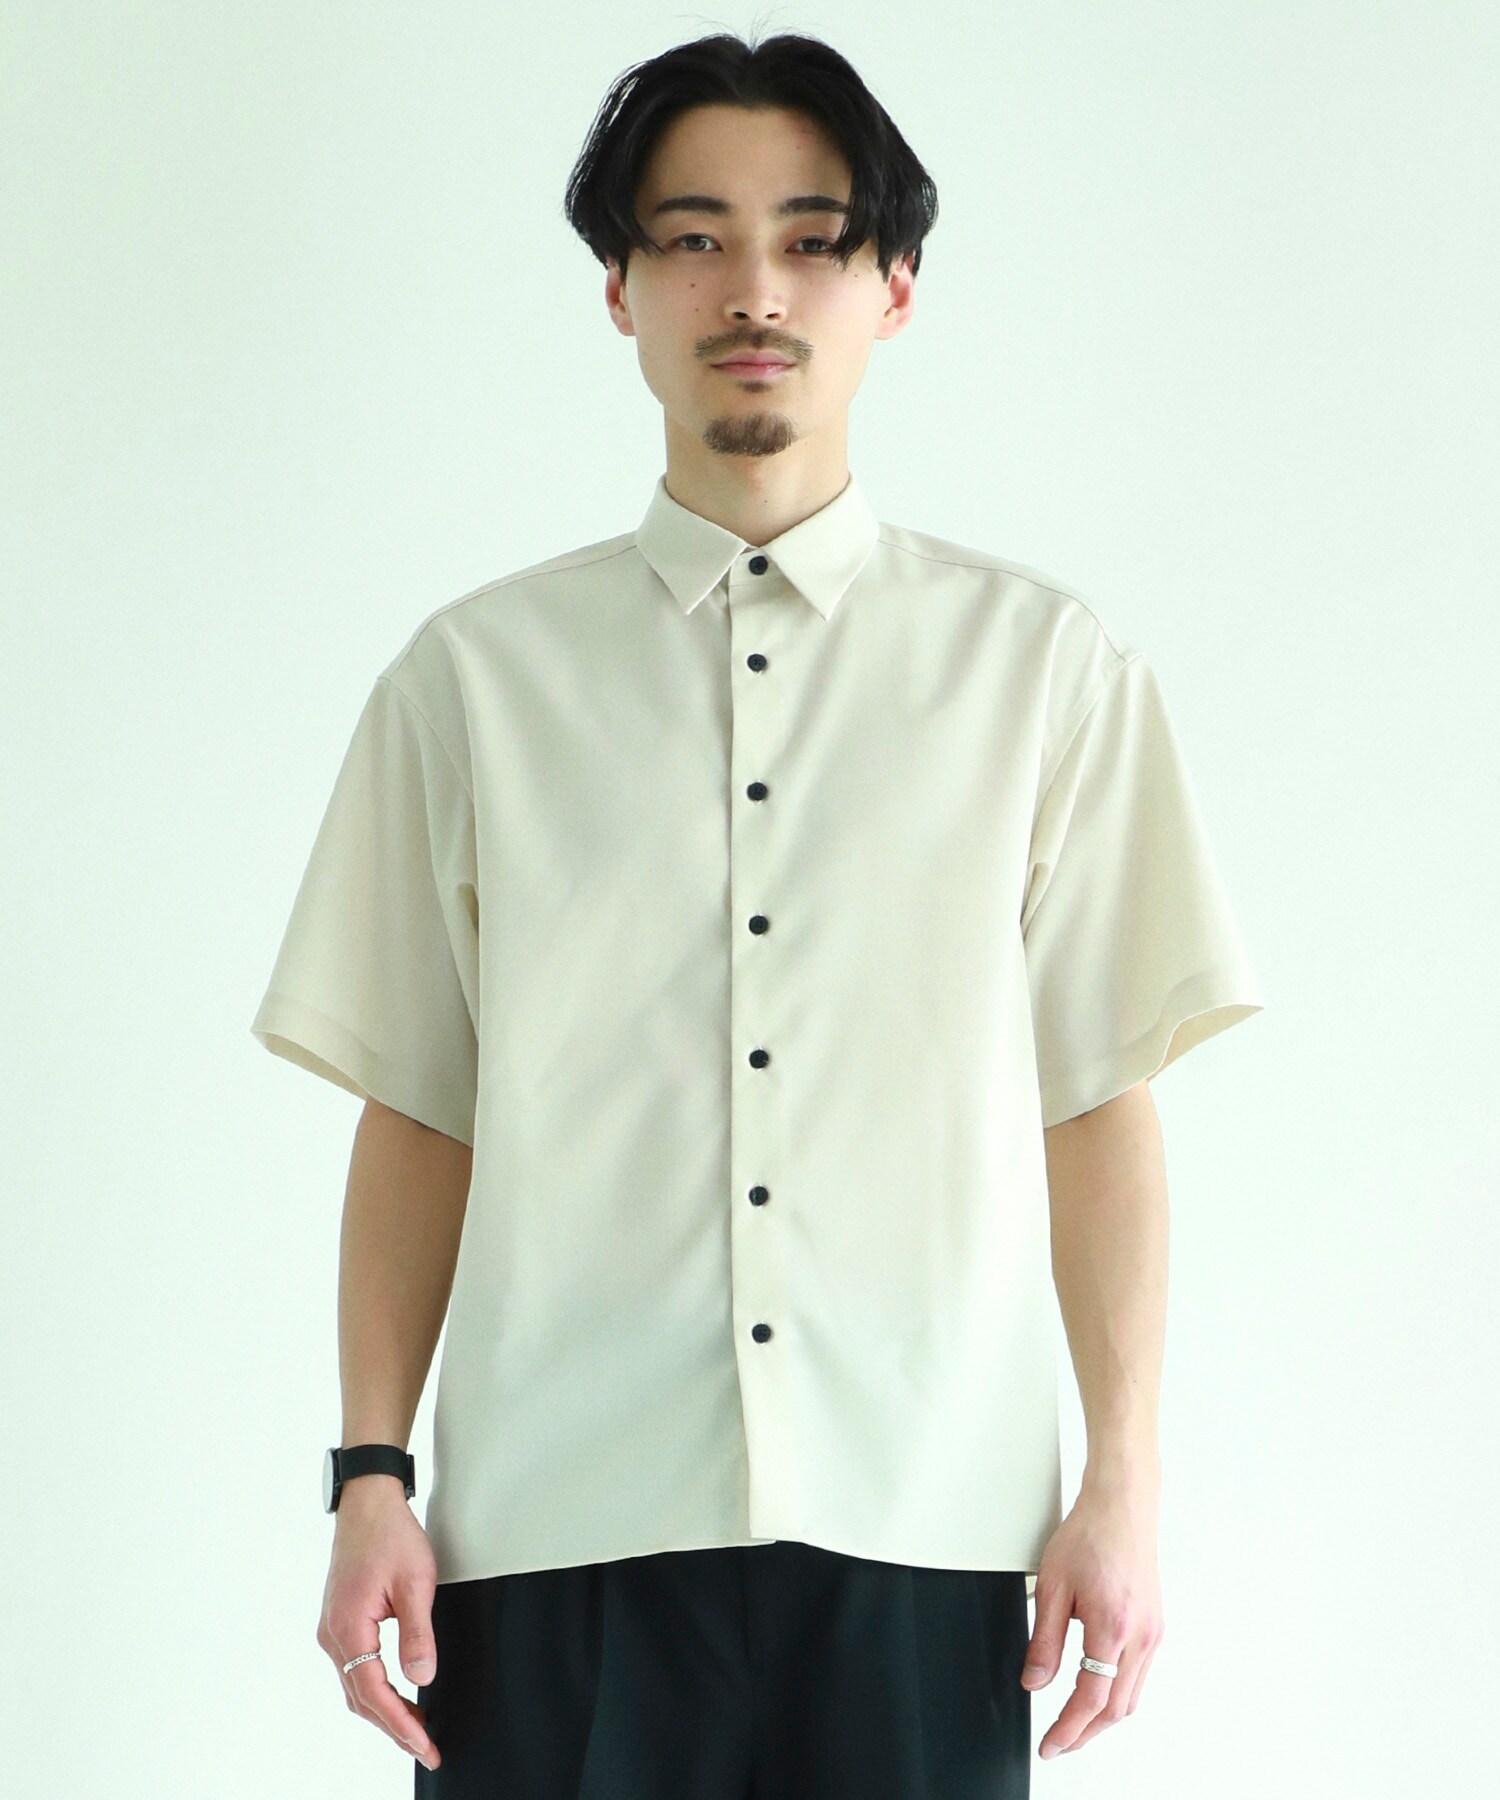 TWO SIDED S/S SHIRT BESPOKE TOKYO